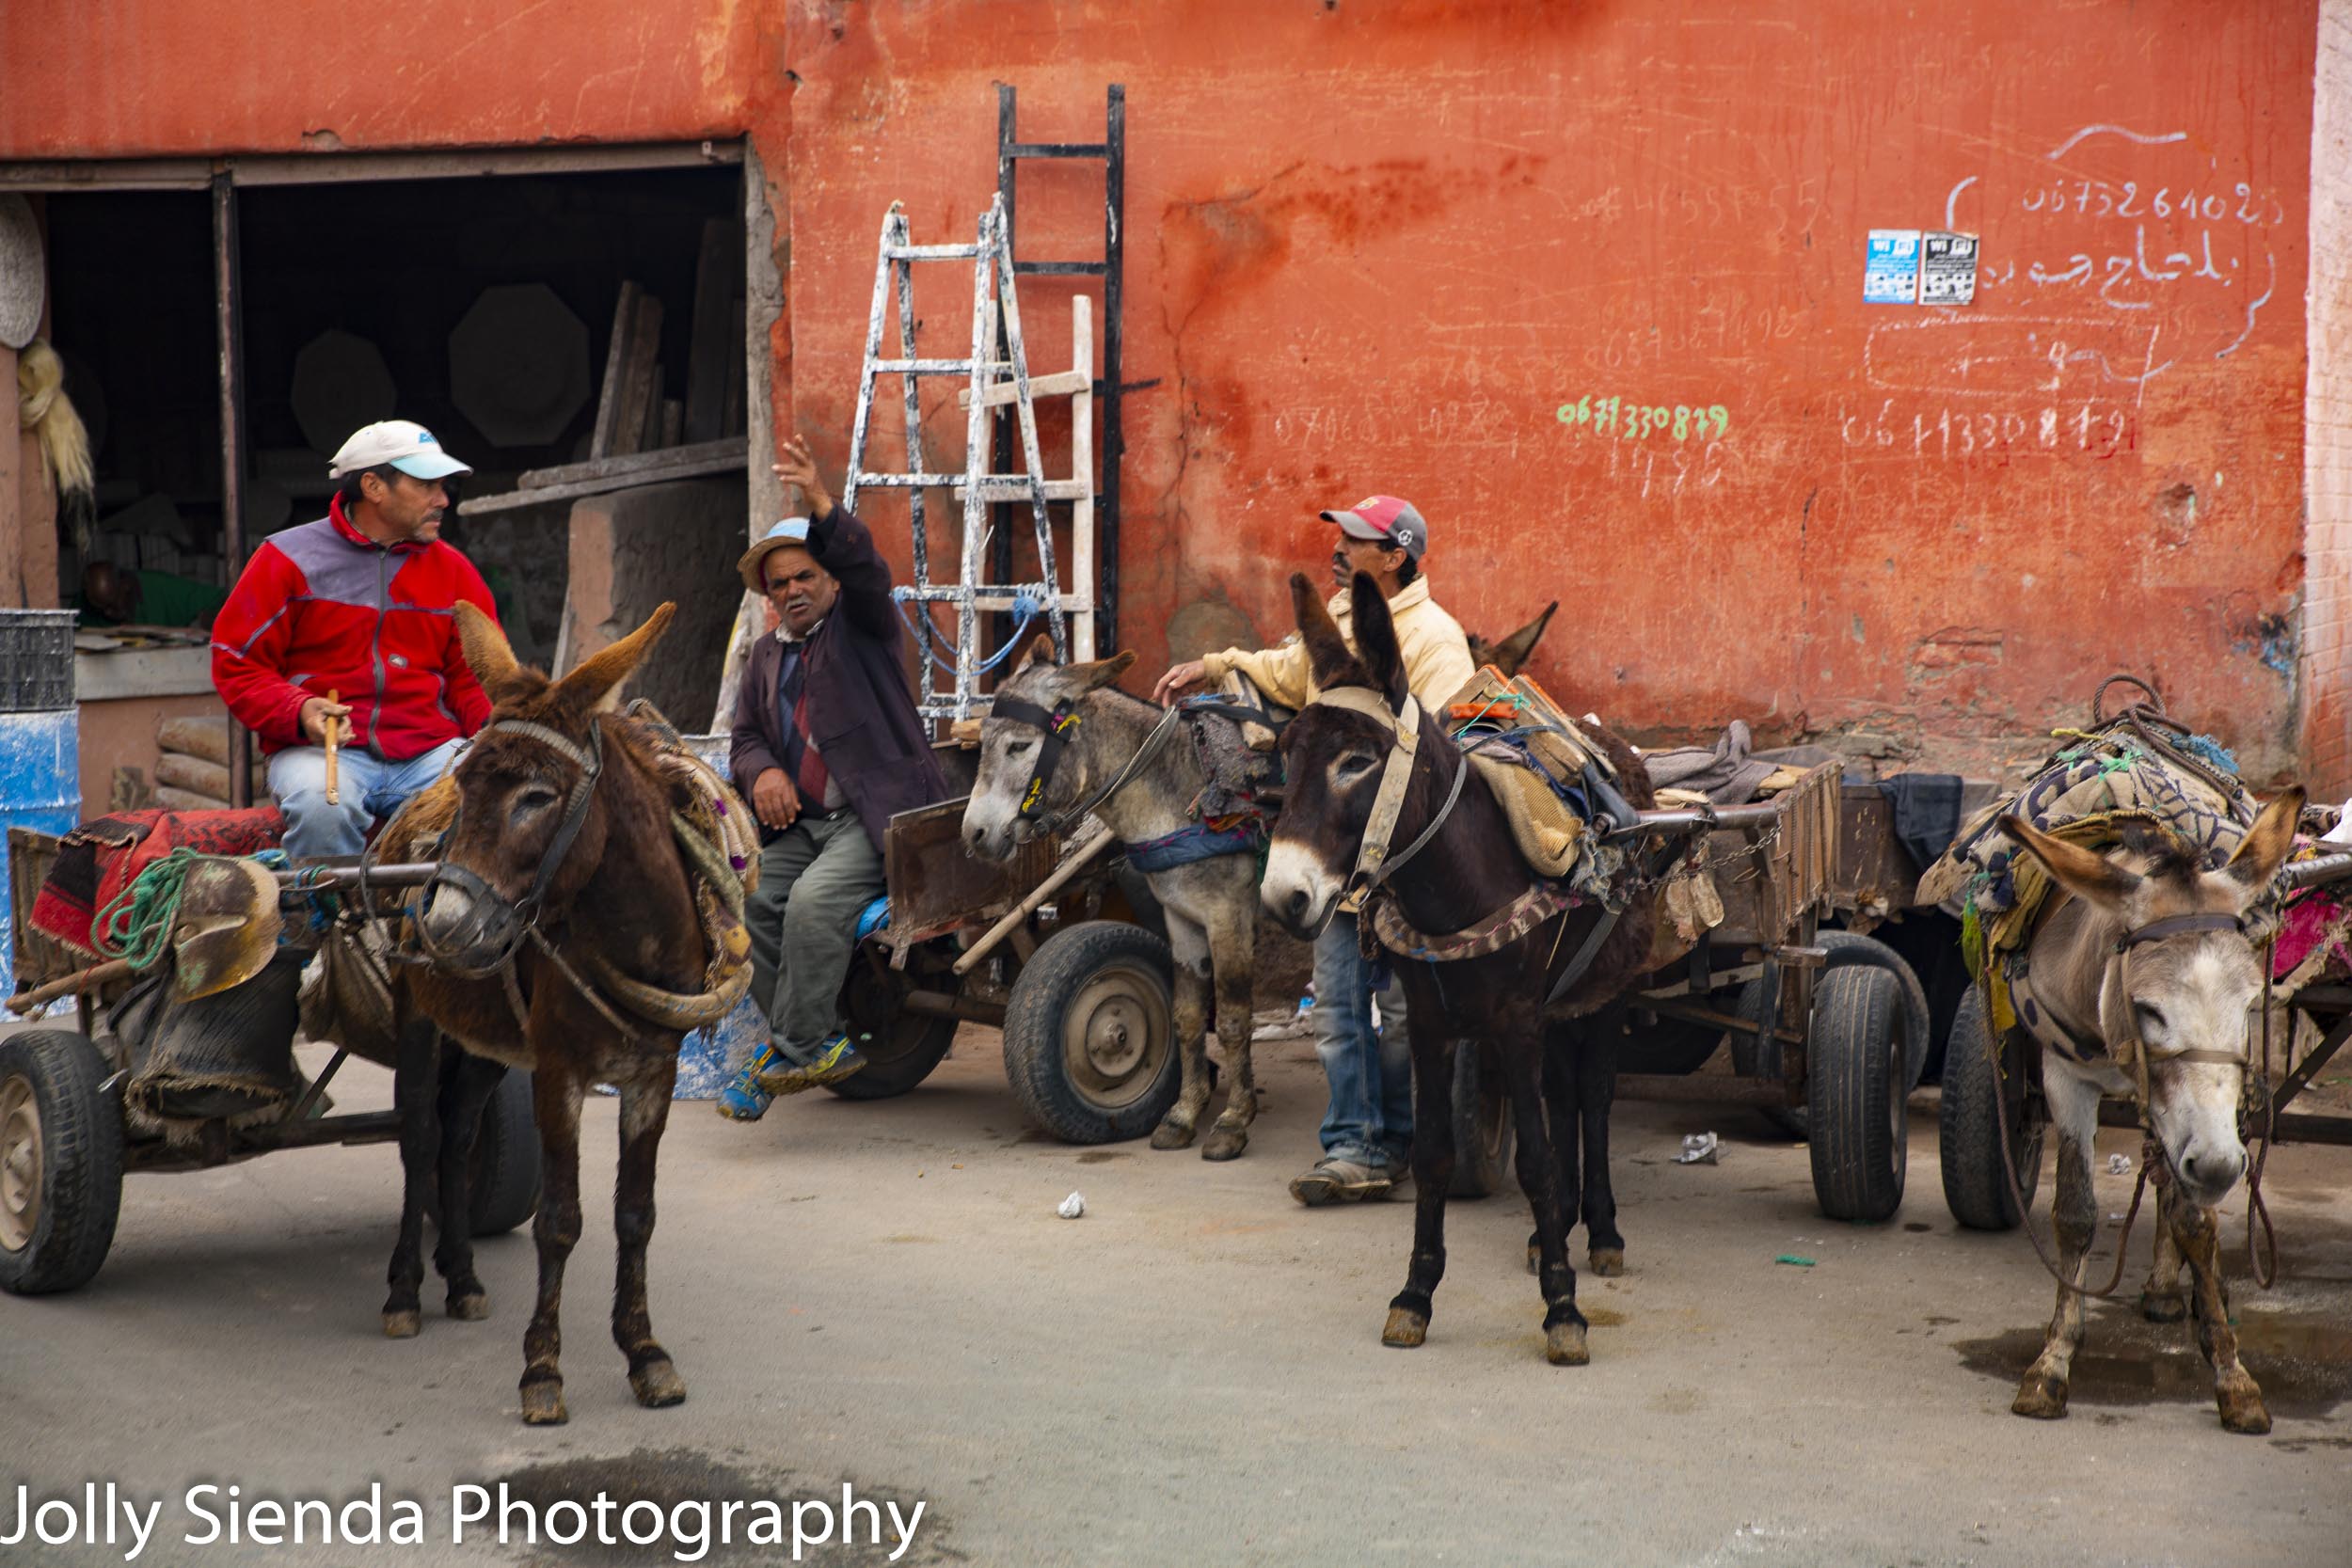 Men rest in the souk with their donkeys